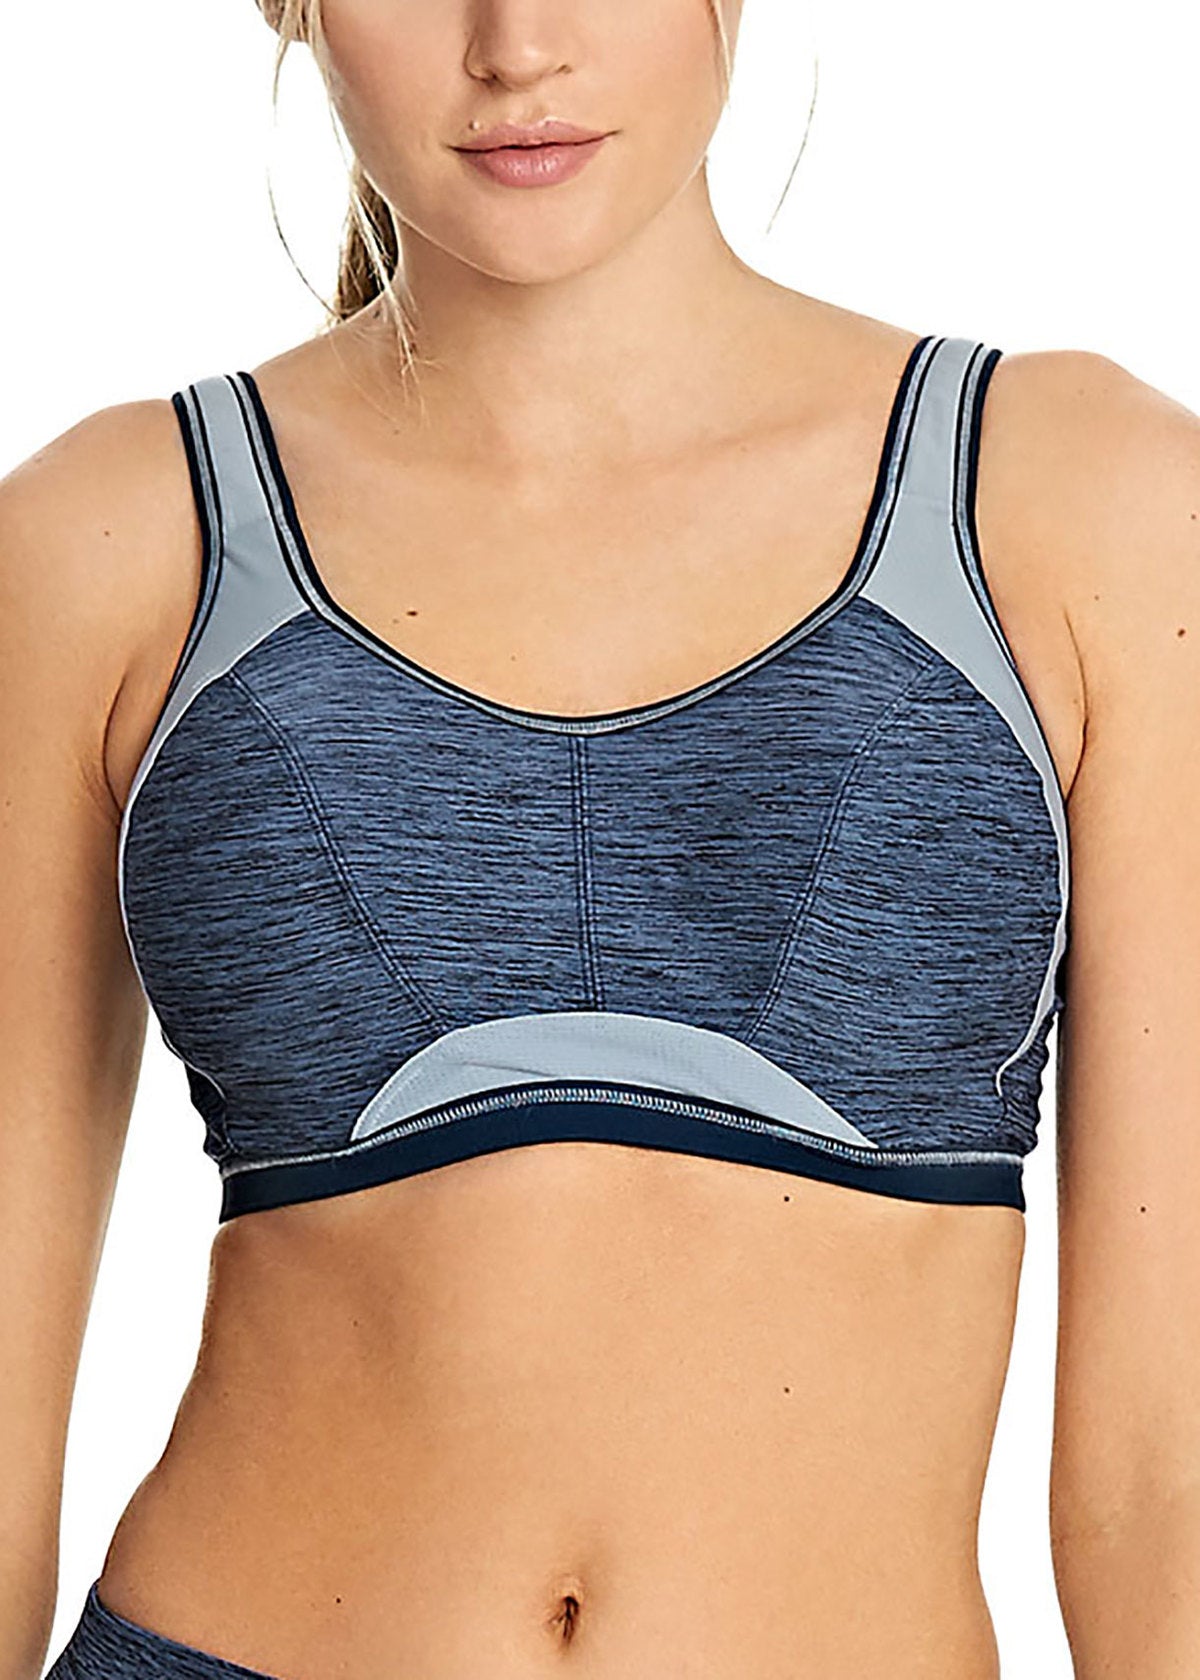 Epic Moulded Crop Top Sports Bra - Total Eclipse